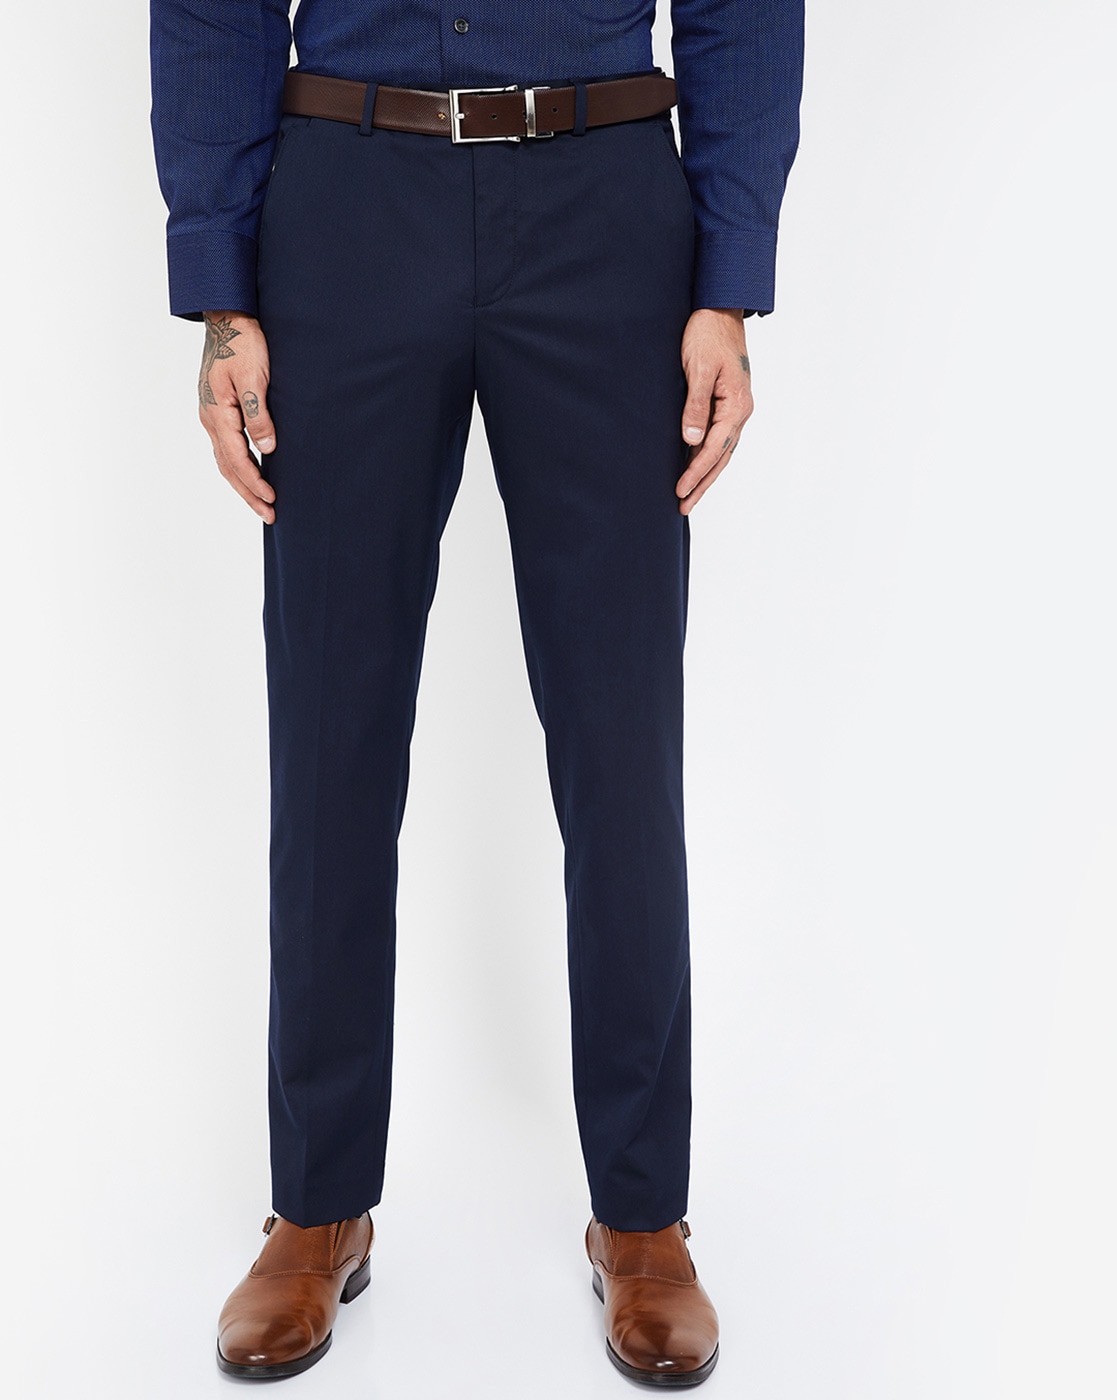 What To Wear With Navy Pants Men